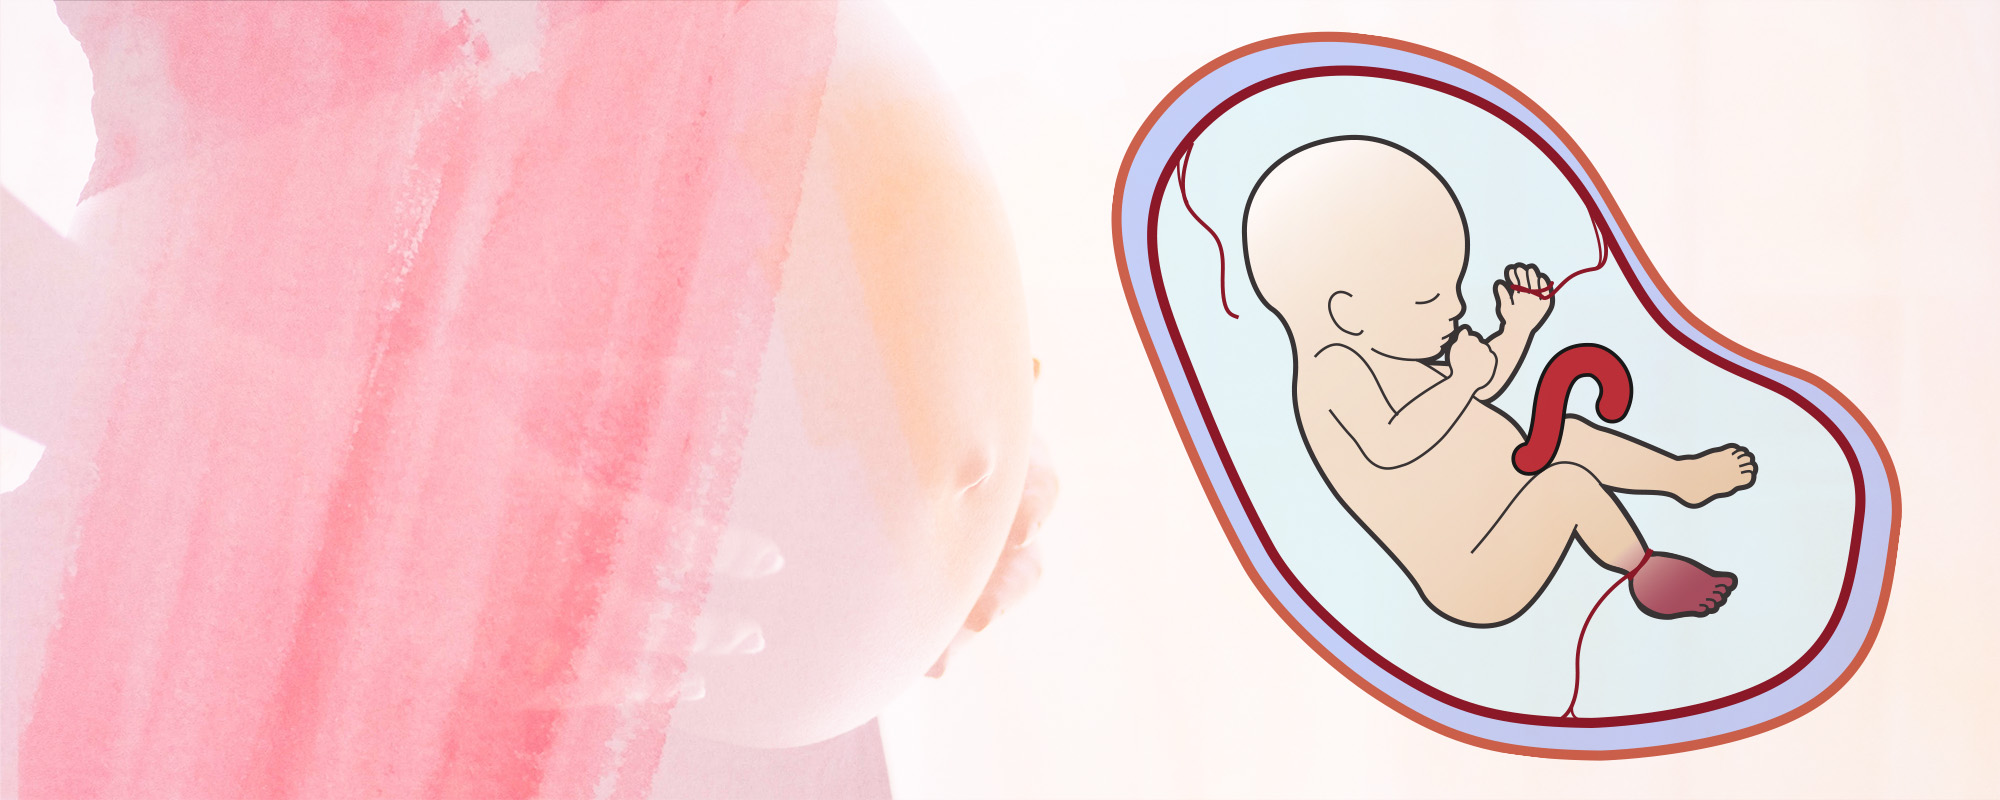 Illustration of baby in womb with amniotic band syndrome